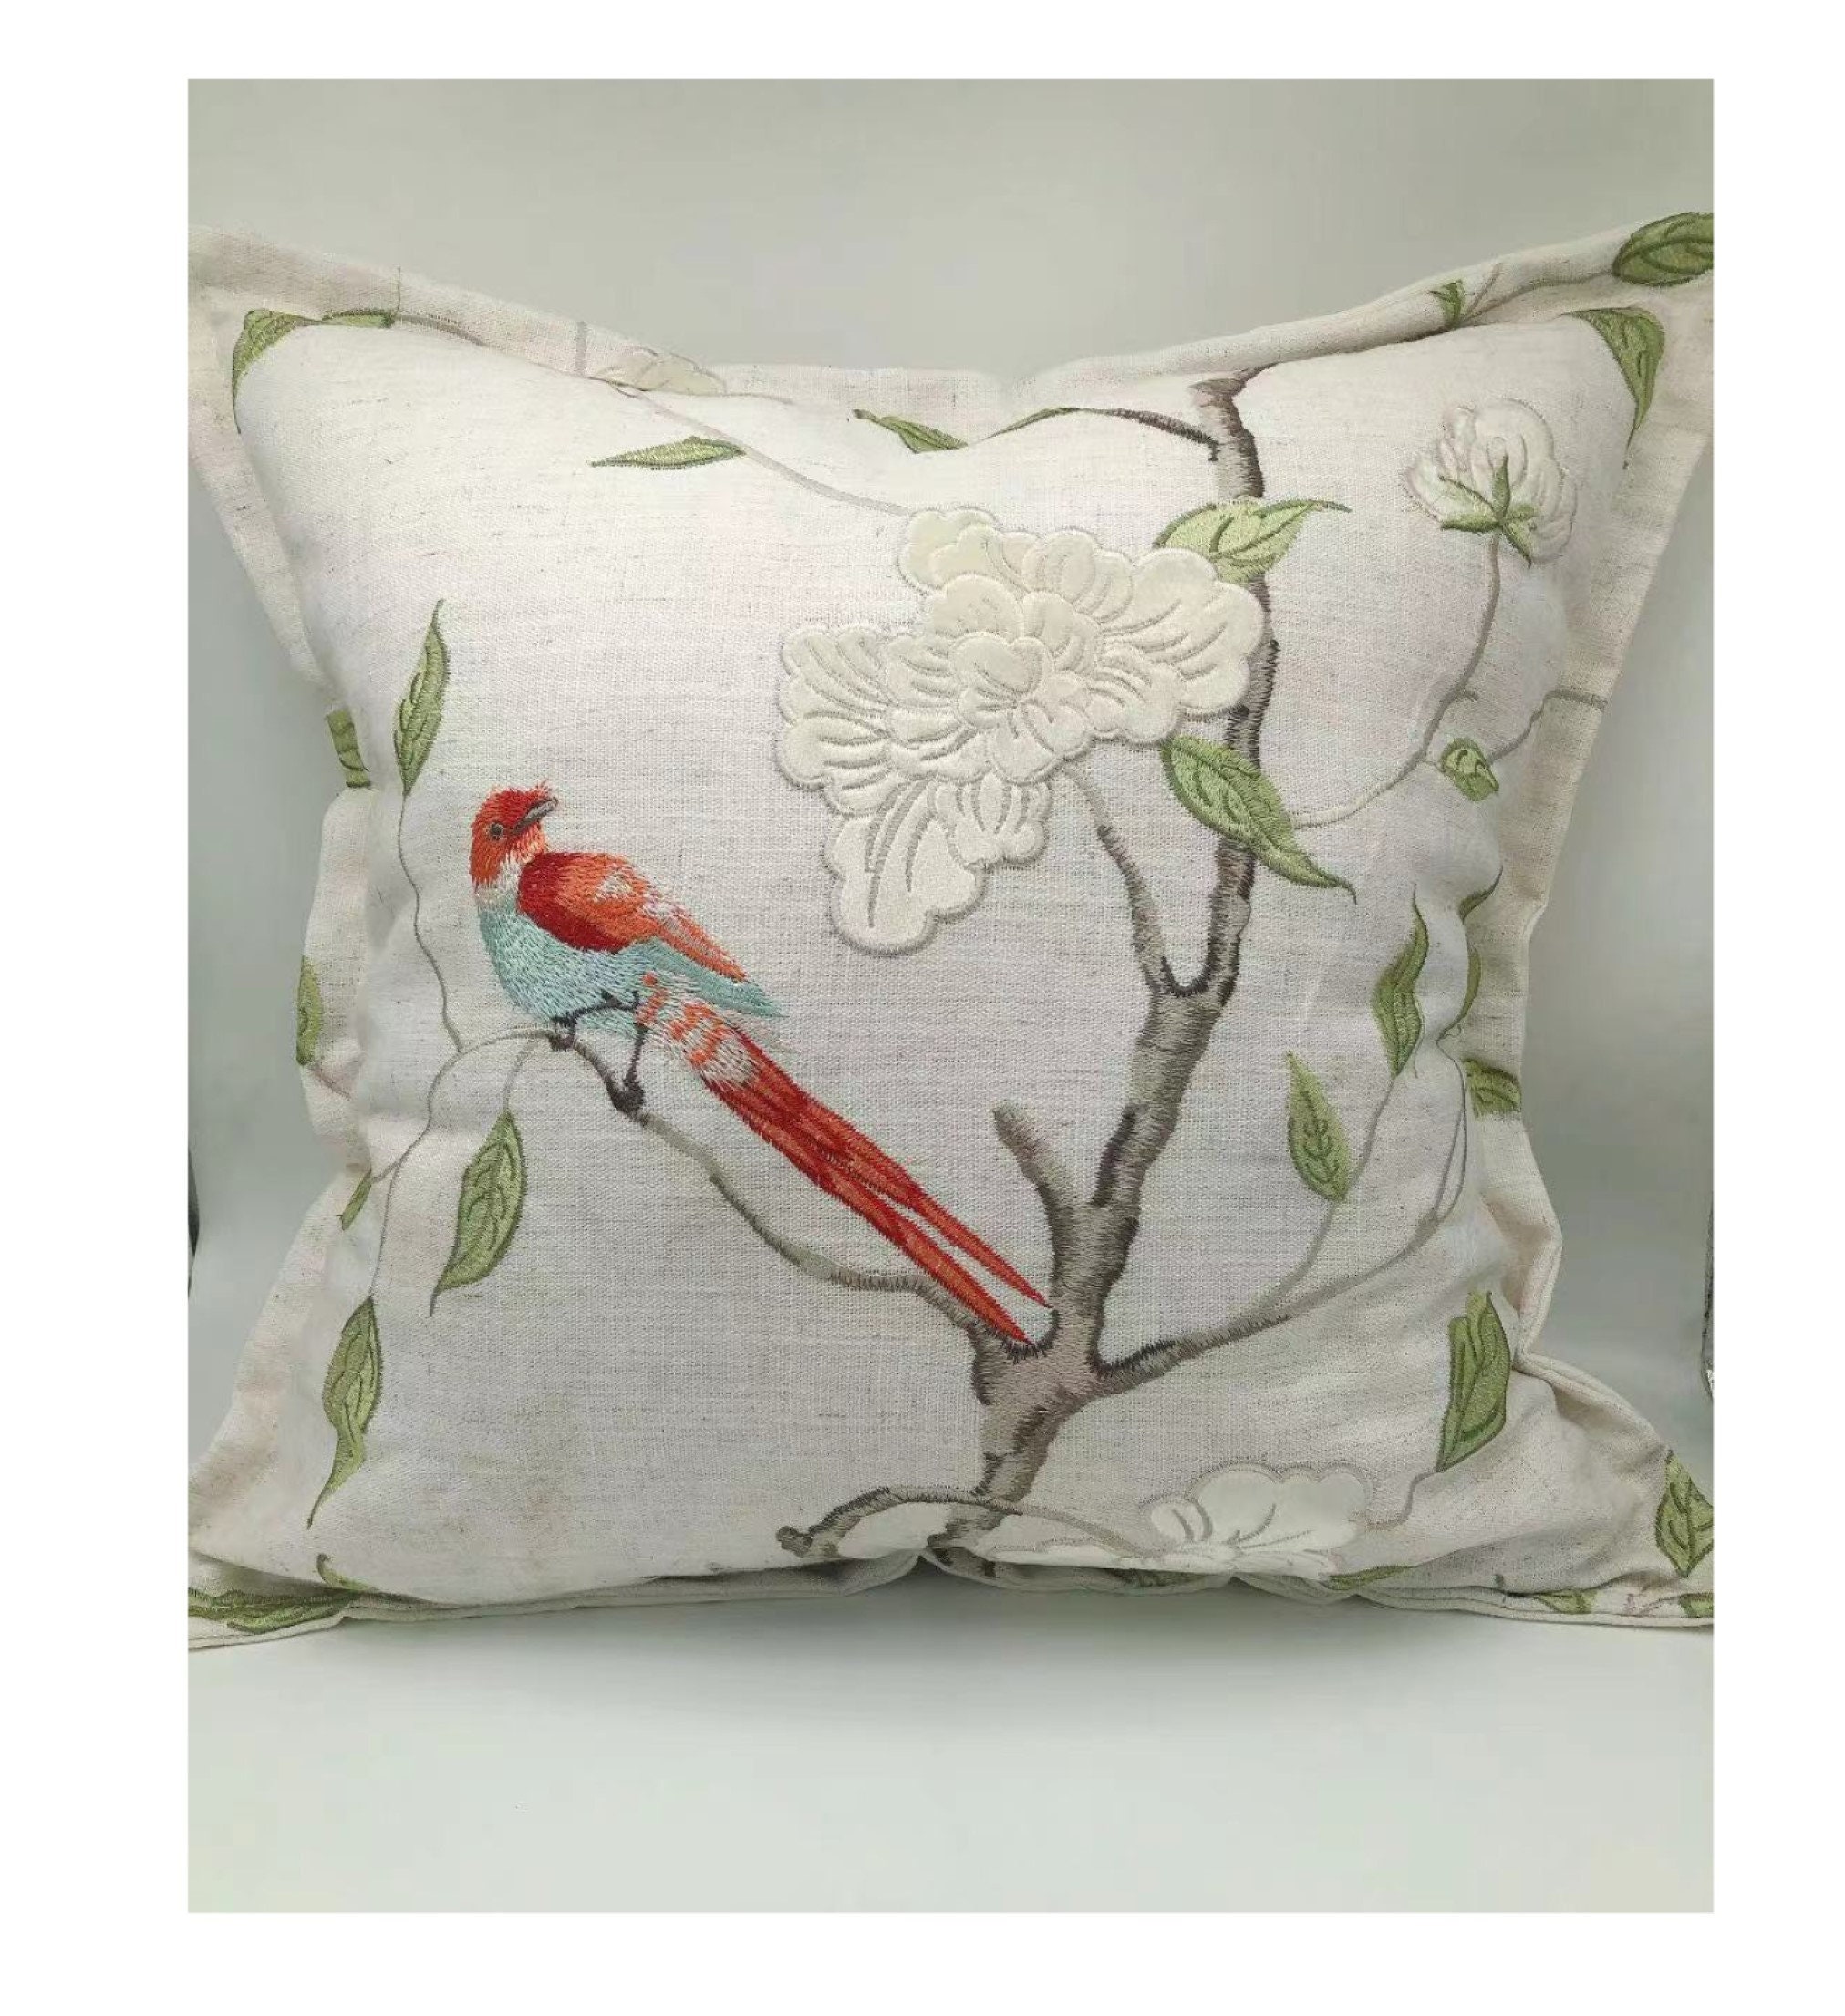 Linen Pillow Cover|Beige Blend Embroidered Floral & Bird Decorative Pillow|Throw Cover Cushion Lumber